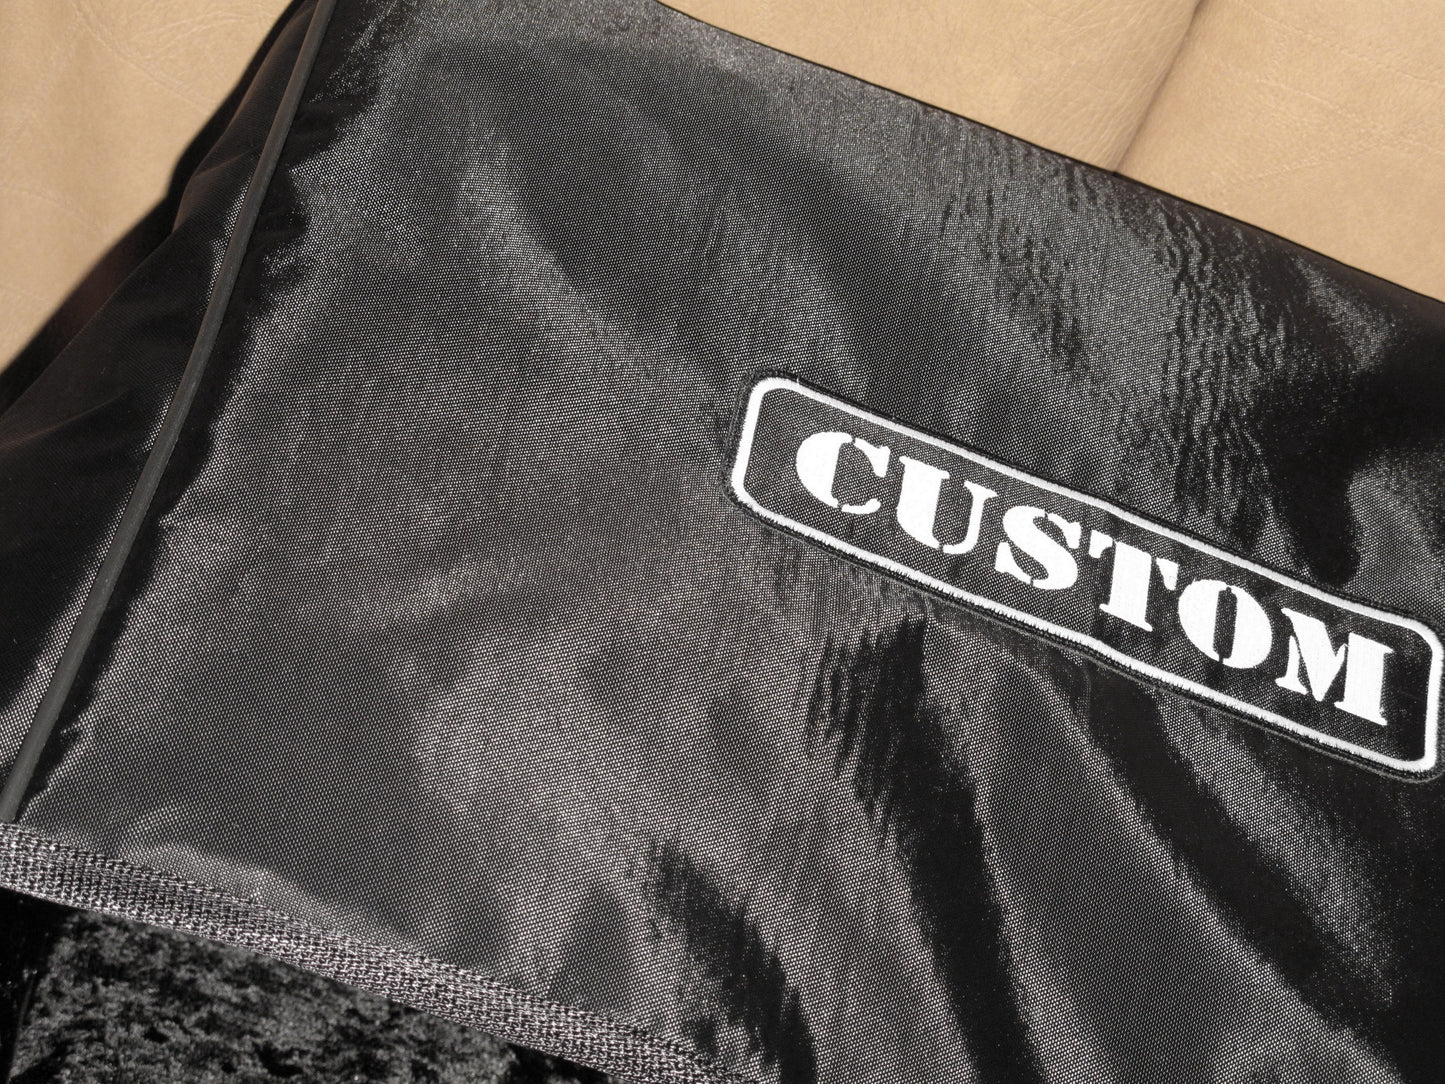 Custom padded handmade high quality cover for MARSHALL Valvestate 8080 combo amp guitar amplifier dust cover for home studio and concerts